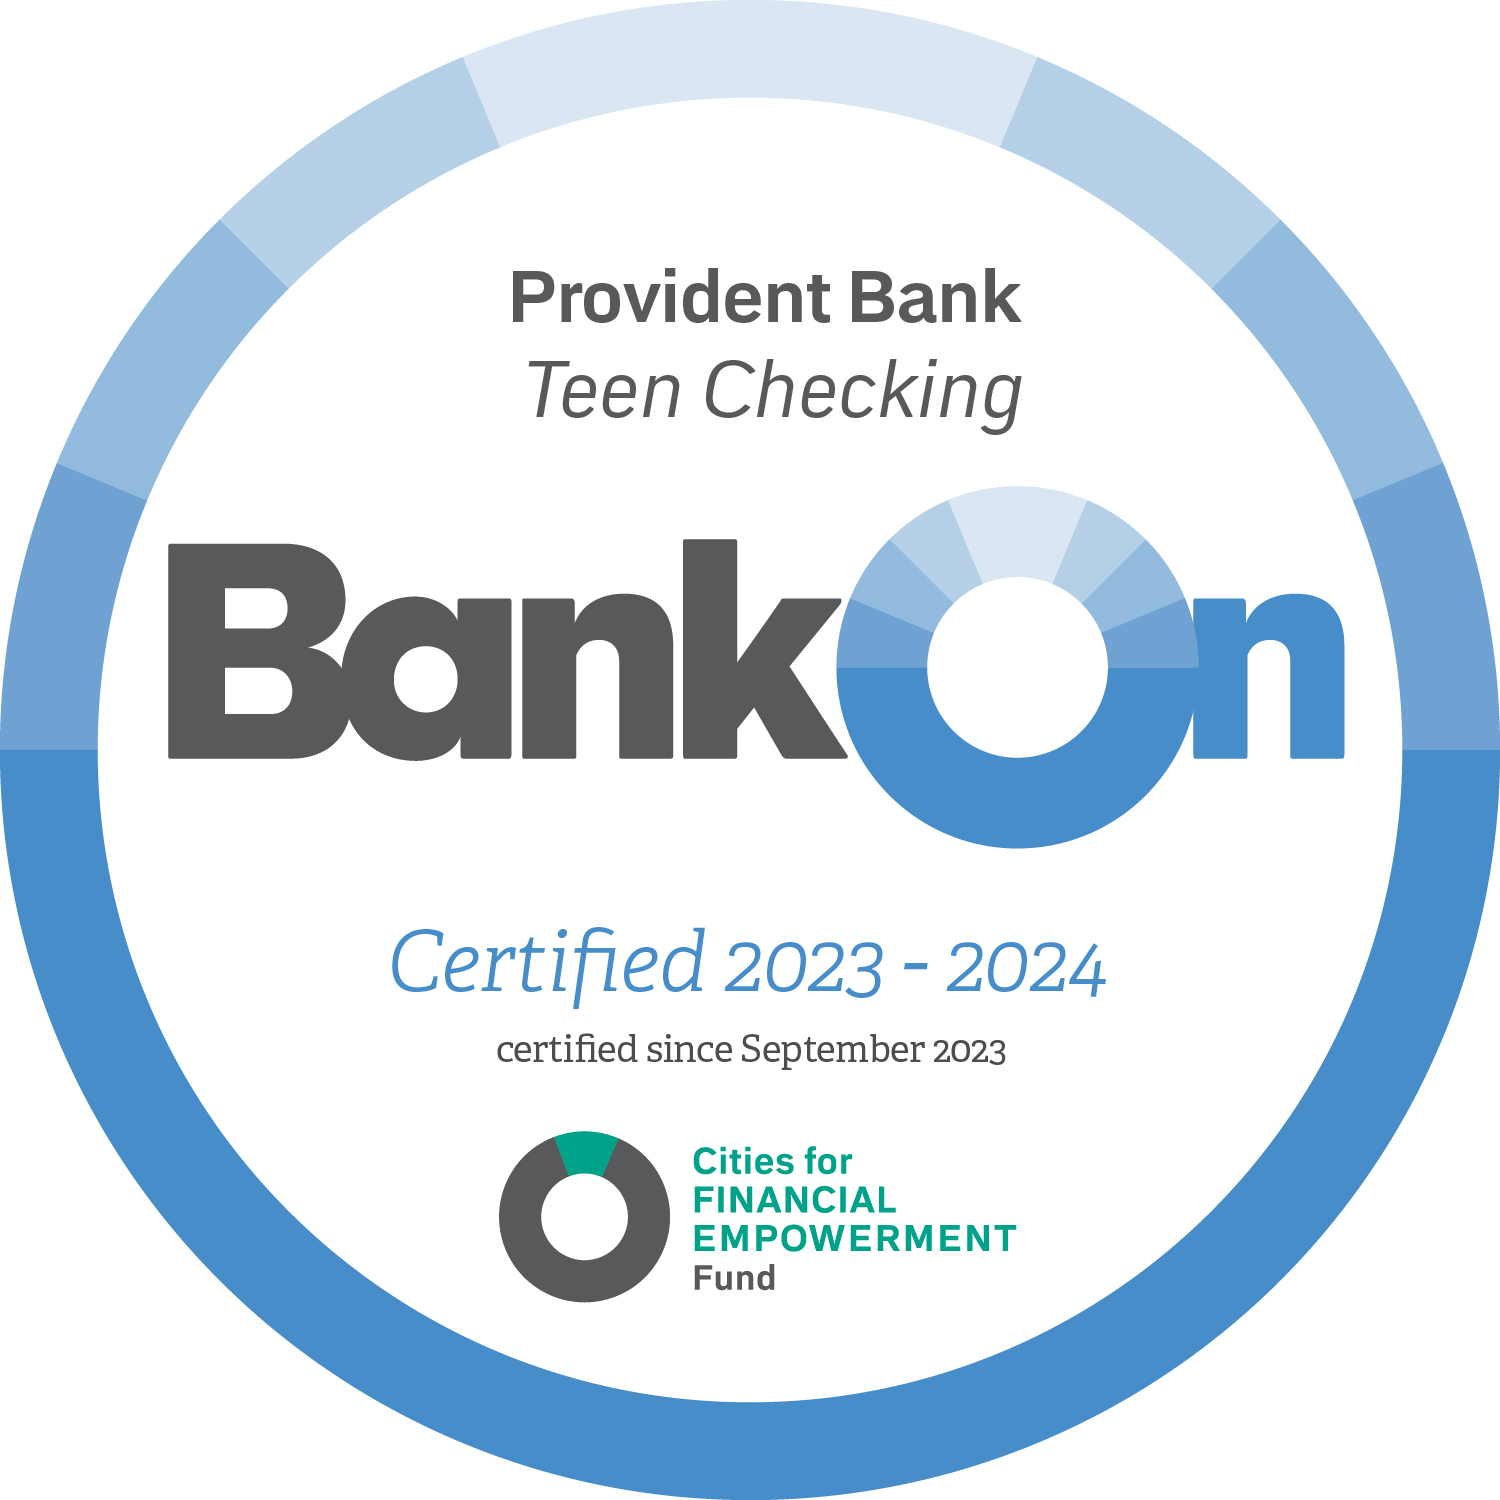 Image reads: Provident Bank Teen Checking. BankOn National Account Standards 2021 to 2022 Approved. Certified since November 2020. Cities for FINANCIAL EMPOWERMENT Fund.